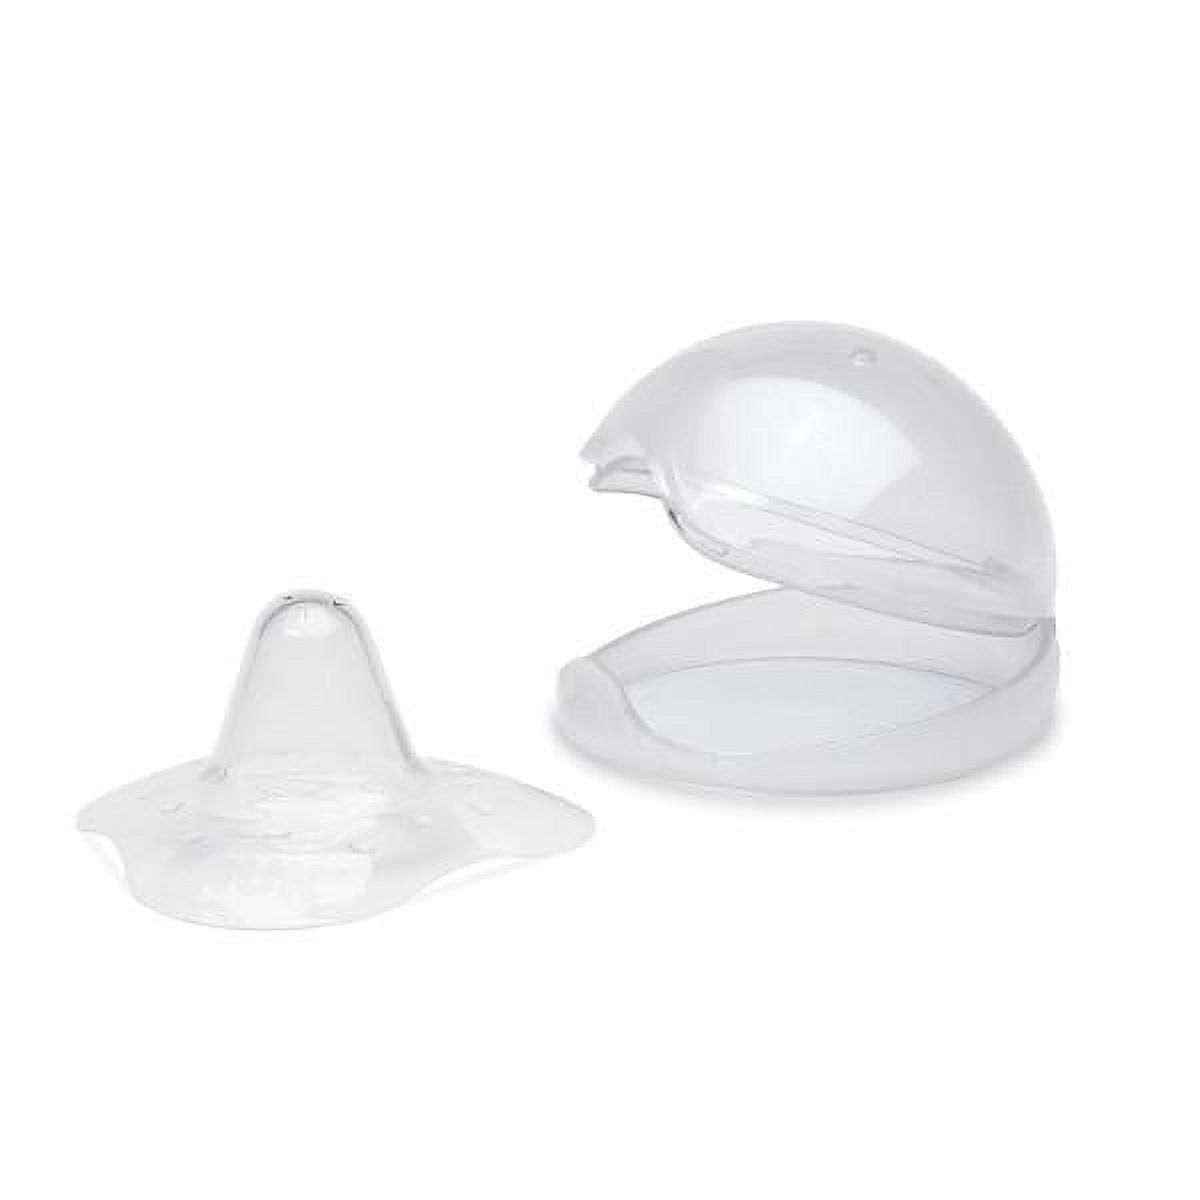 NUK Simply Natural Barely There Nipple Shield with Case, Silicone - image 1 of 2